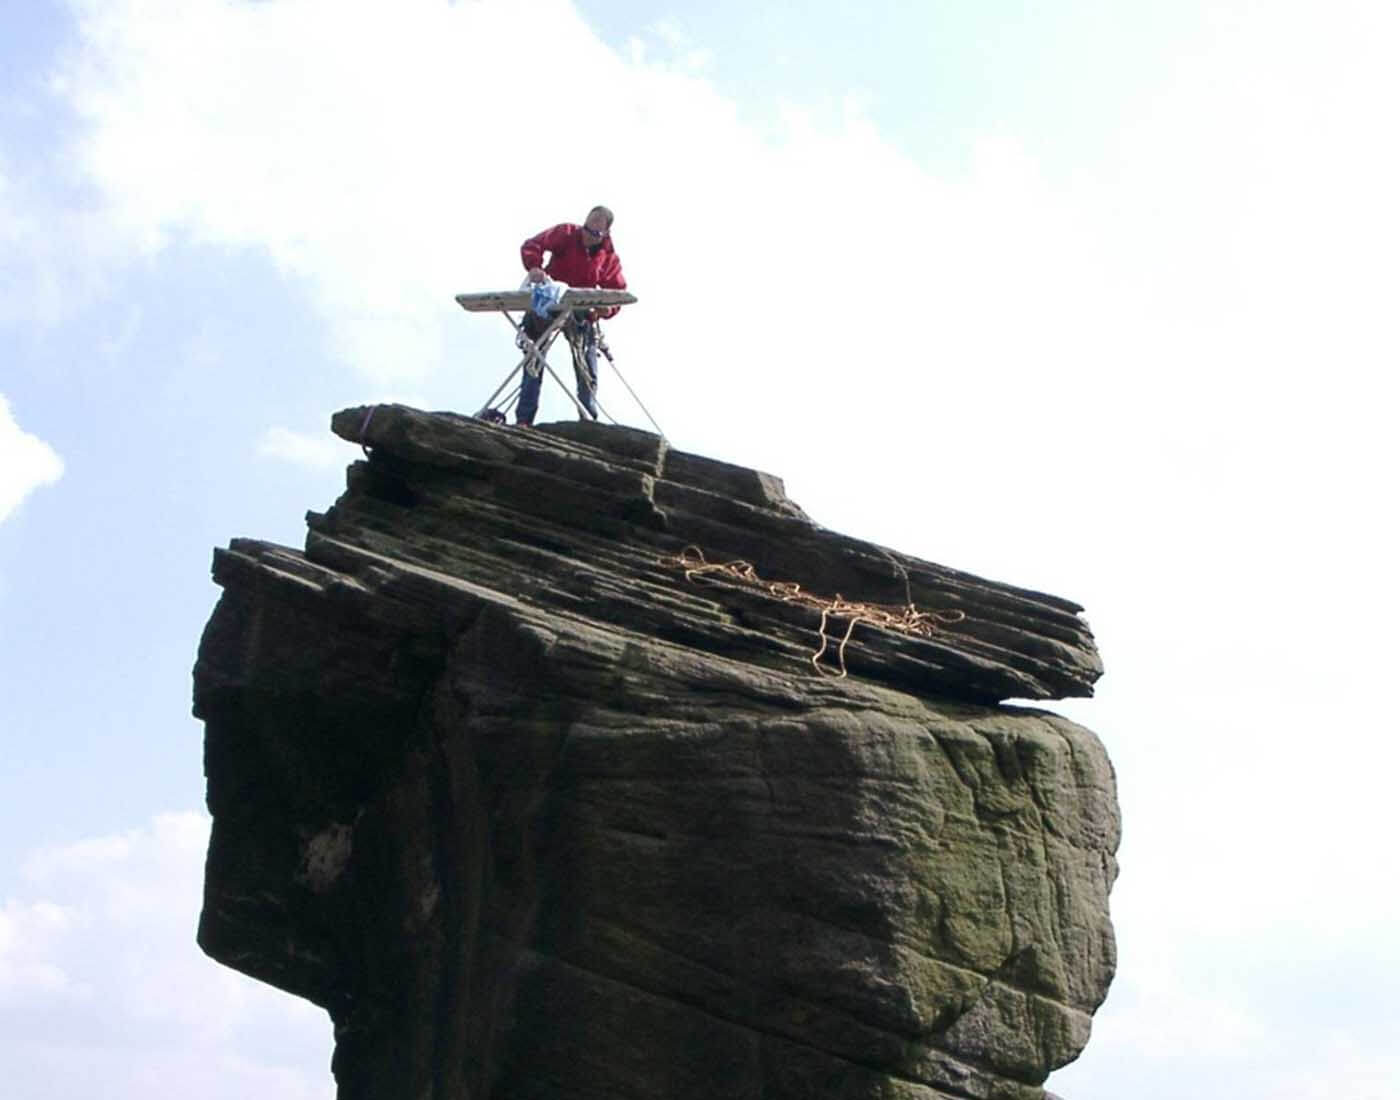 A person doing Extreme Ironing on the top of mountain